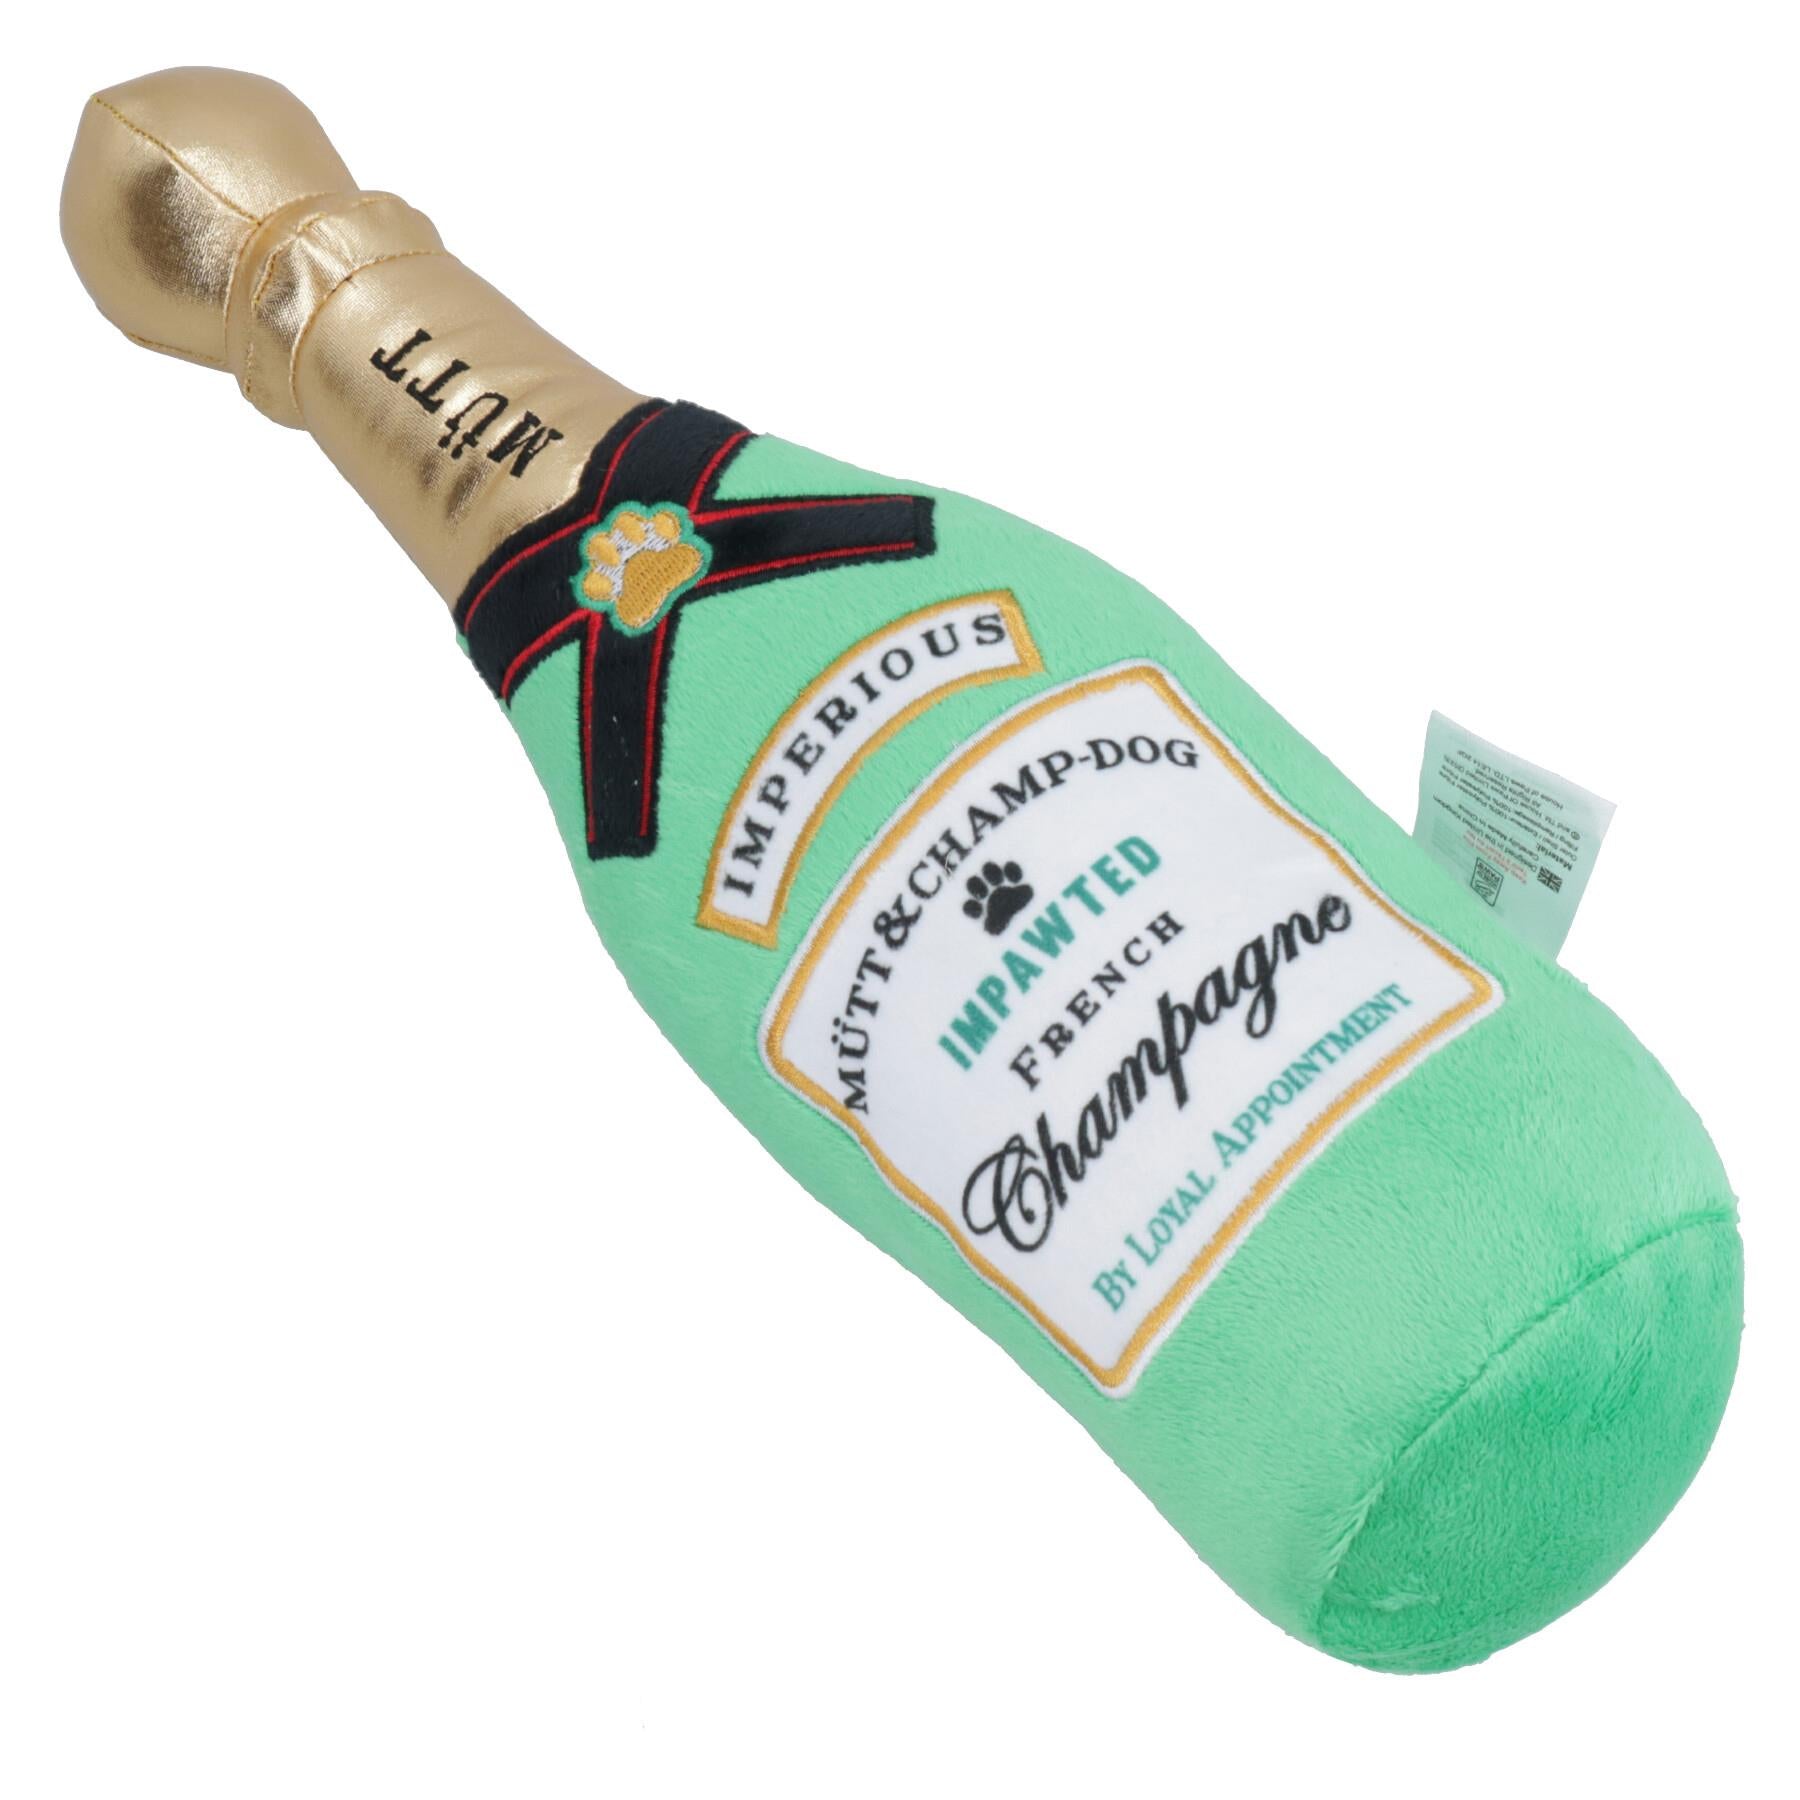 Dog Christmas Gift Plush Champaign Bottle Squeaky Plush Play Toy Present